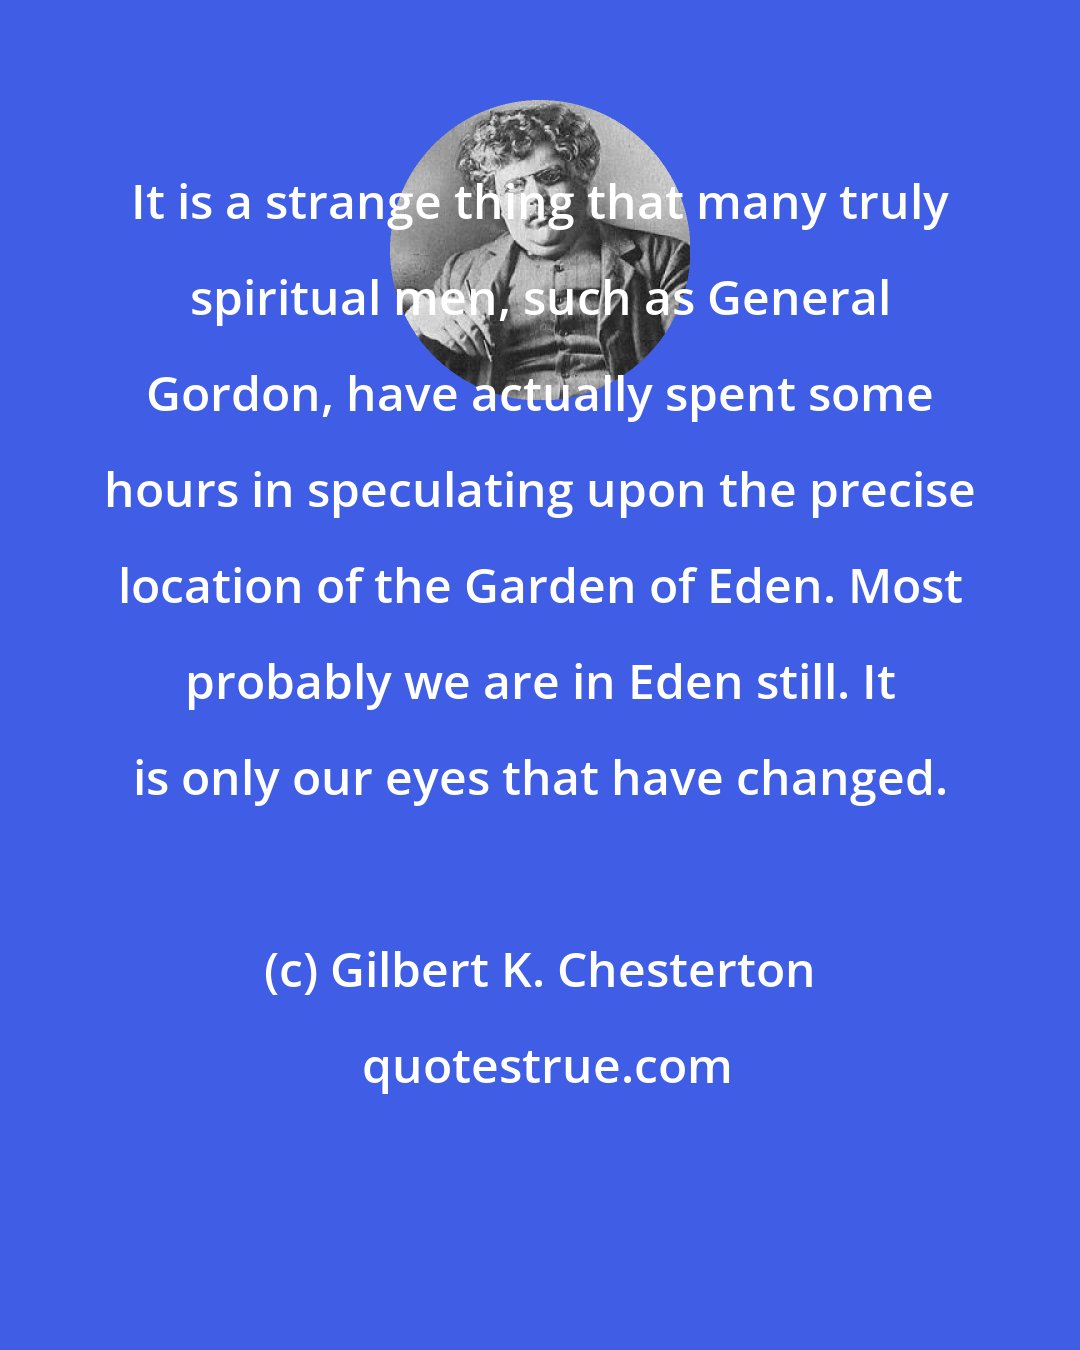 Gilbert K. Chesterton: It is a strange thing that many truly spiritual men, such as General Gordon, have actually spent some hours in speculating upon the precise location of the Garden of Eden. Most probably we are in Eden still. It is only our eyes that have changed.